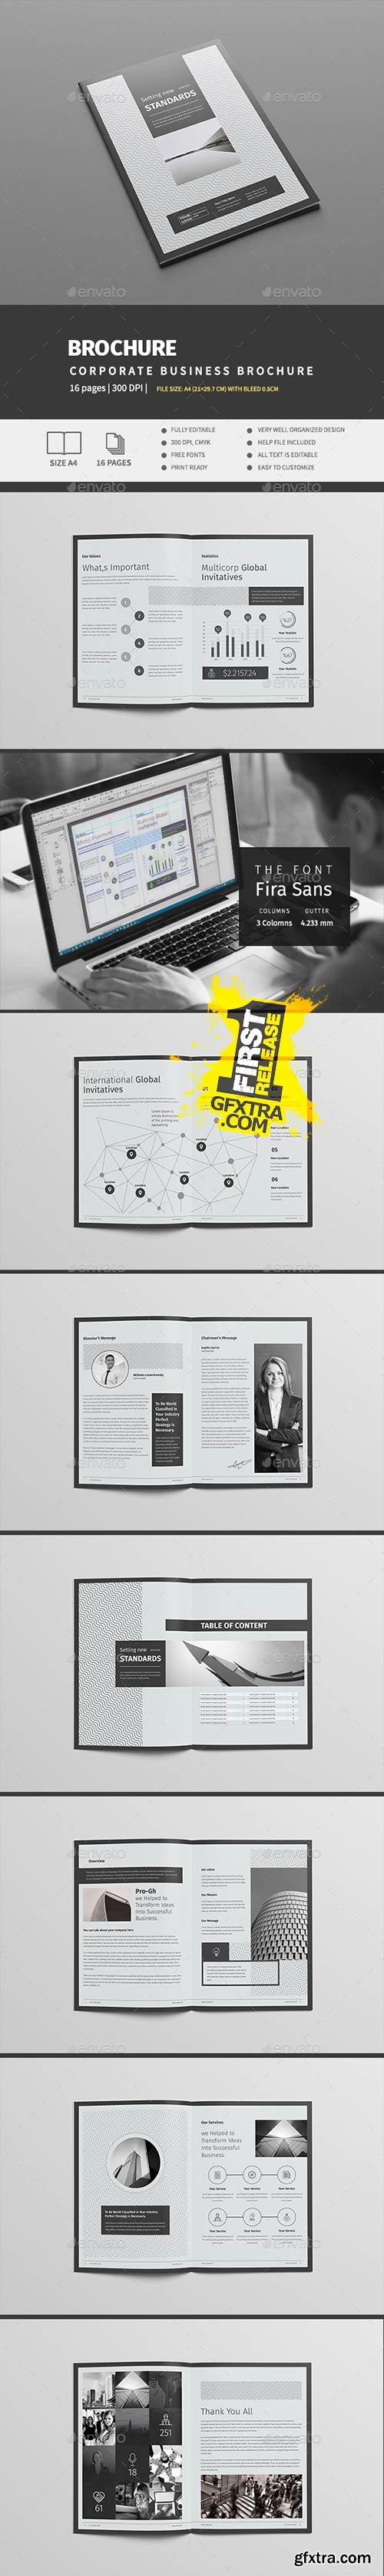 GraphicRiver - Multipurpose Brochure Template 16 Pages 15981025